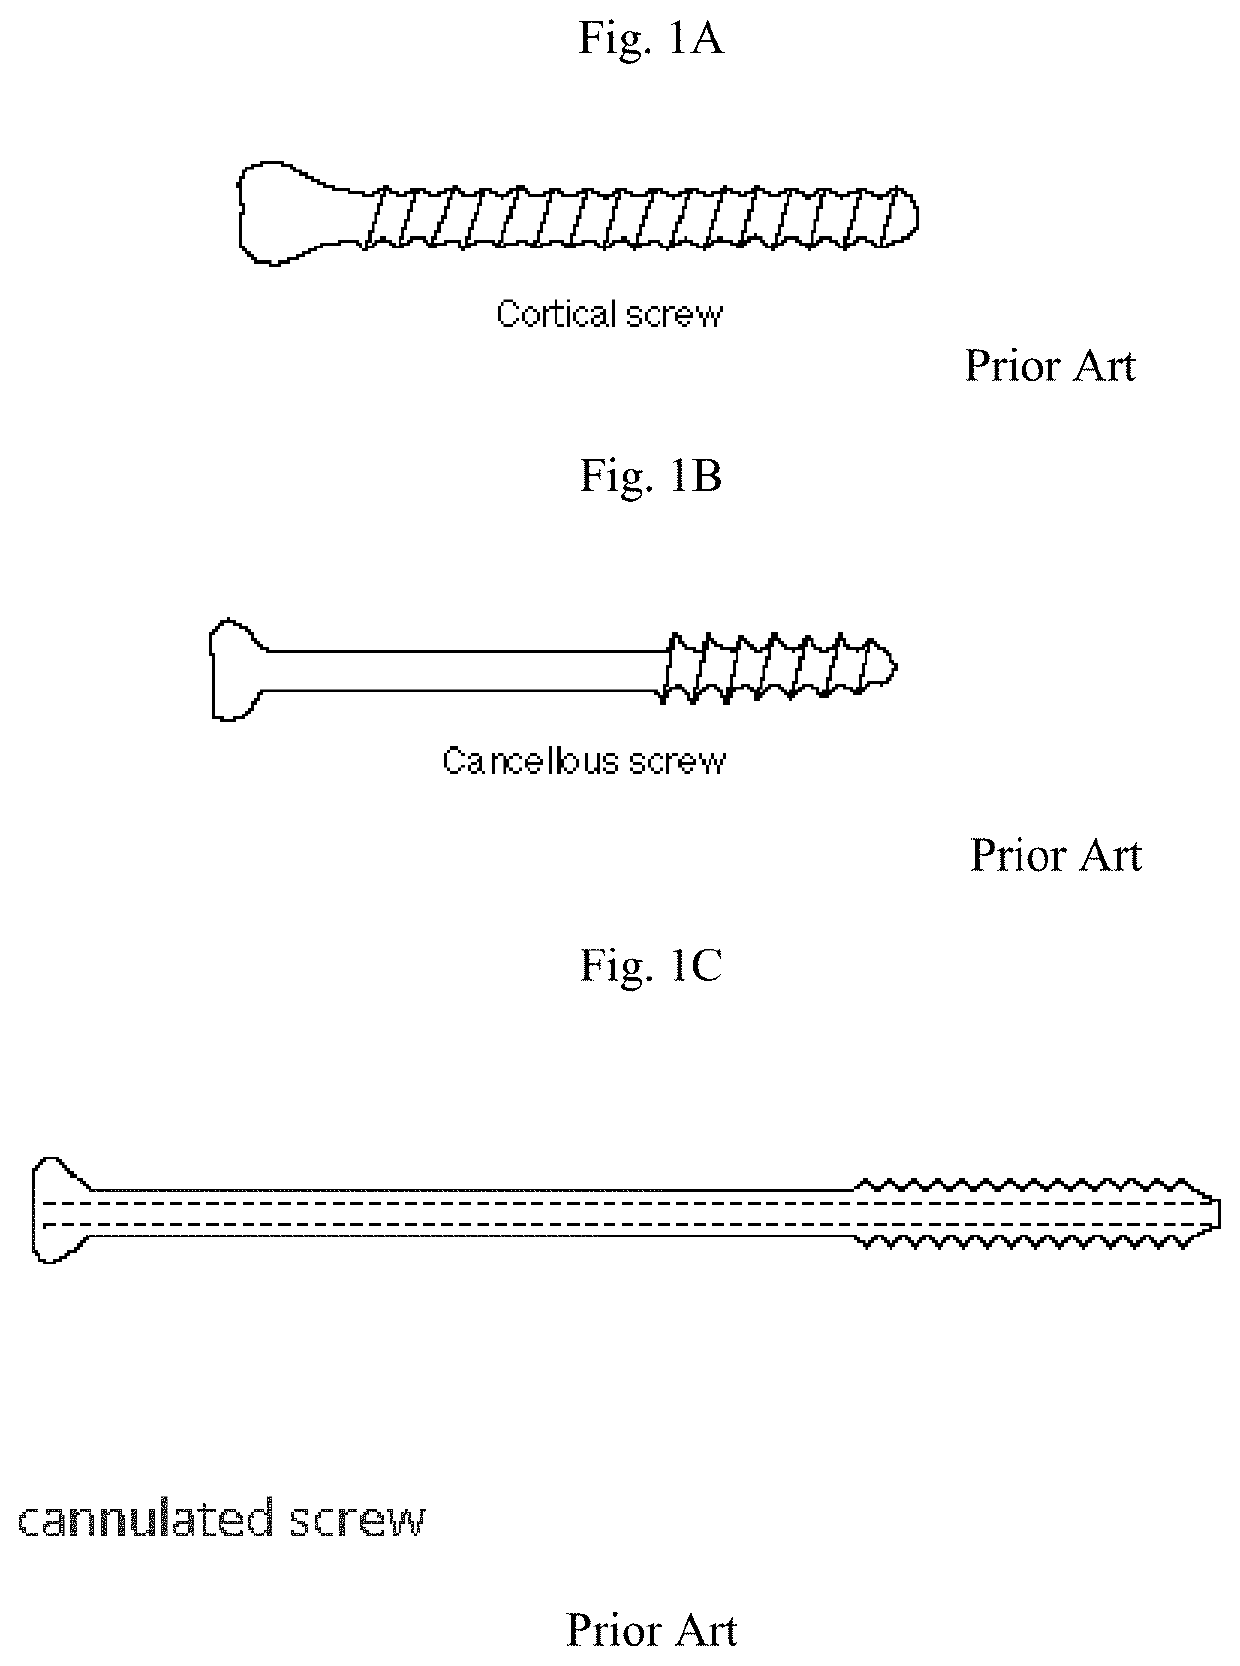 One Step Surgical Screw Fixation Technique and Design